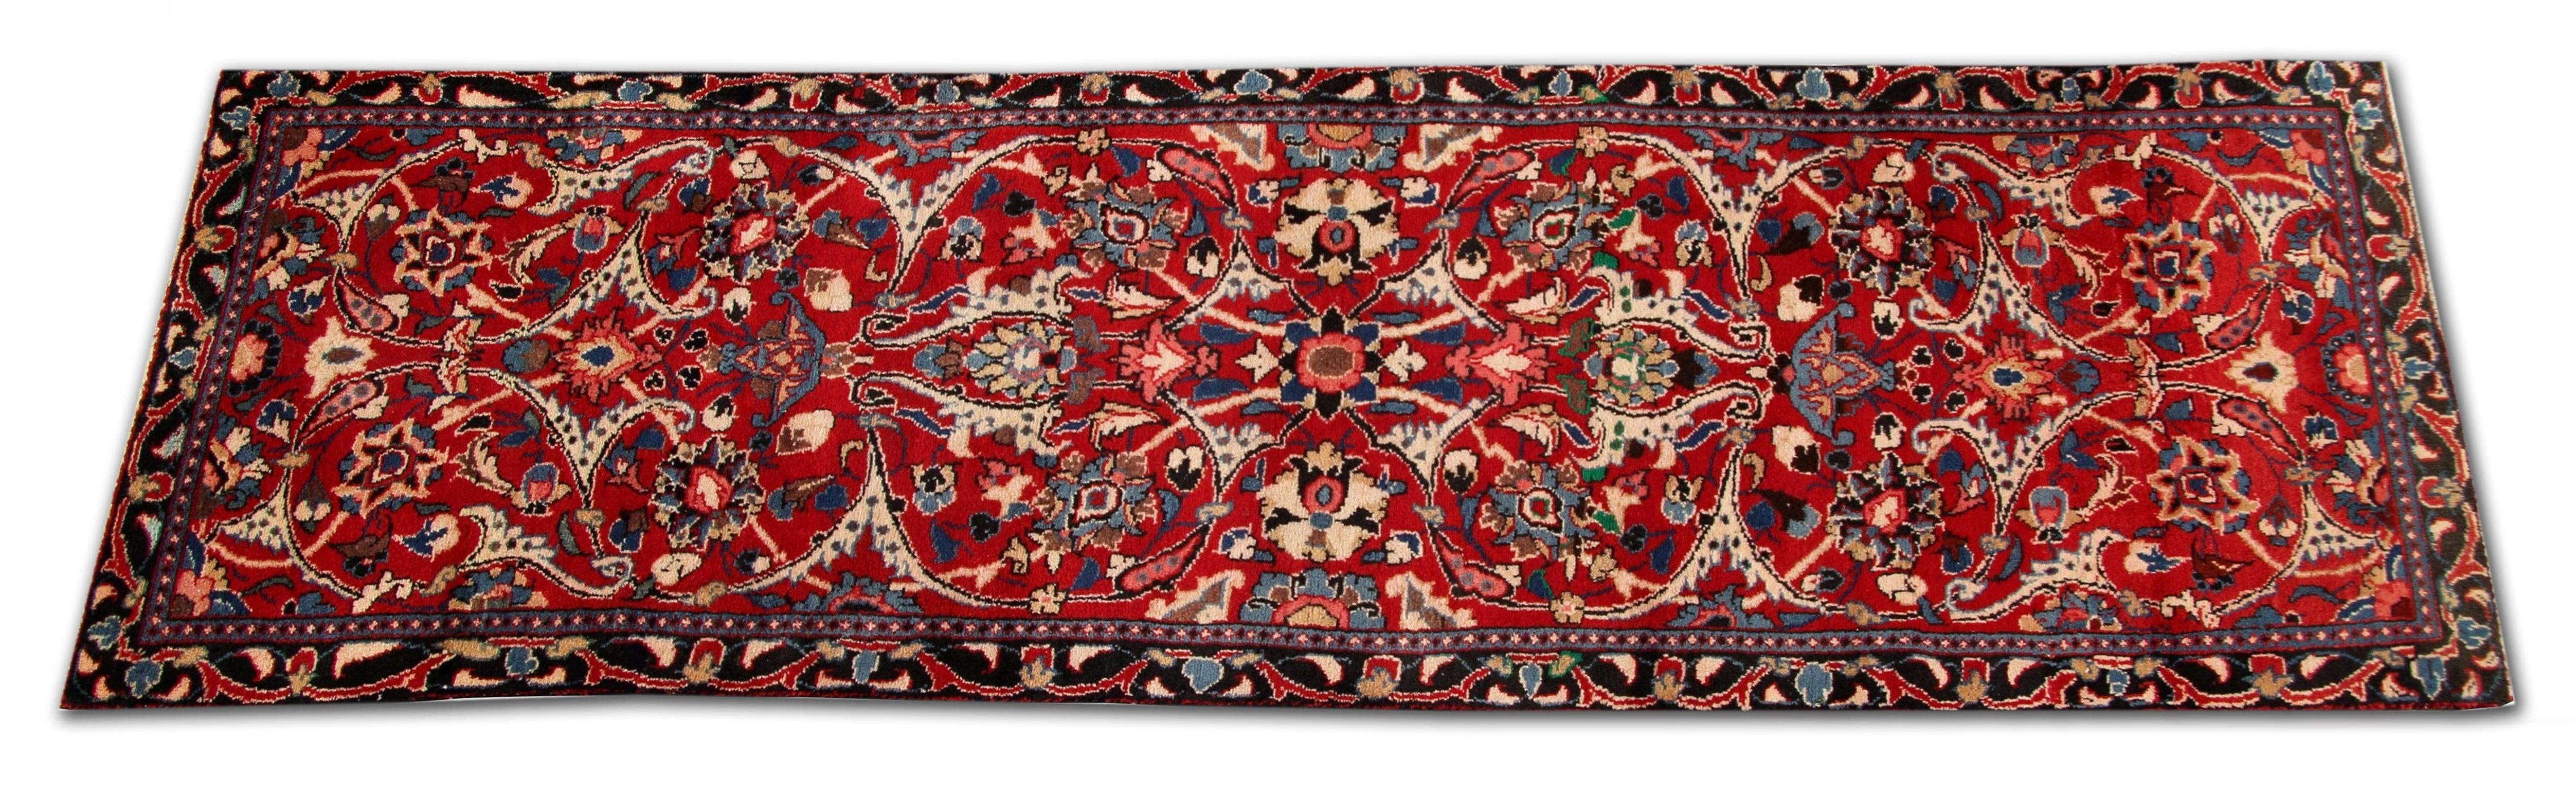 The central design has been intricately woven with a rich red background and blue, beige, cream and brown accents that make up the highly detailed symmetrical design. Featuring floral medallions throughout, this is then framed by a repeat pattern